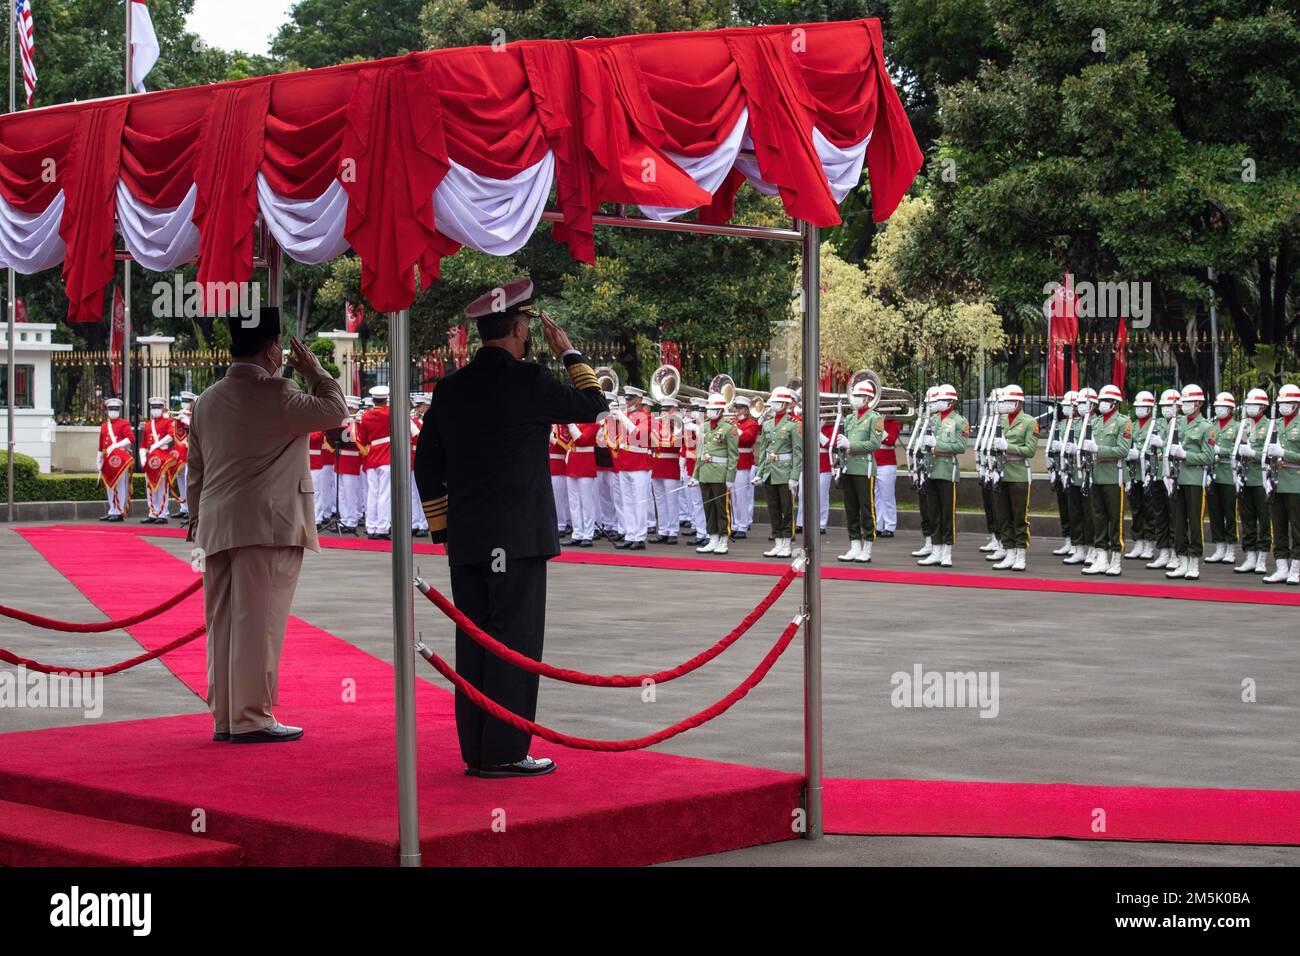 JAKARTA (March 21, 2022)  Commander, U.S. Indo-Pacific Command Adm. John C. Aquilino and Minister of Defence Prabowo Subianto participate in an official welcome ceremony prior to an office call to discuss regional security in the Indo-Pacific.  Aquilino is in Indonesia meeting with regional leaders to strengthen the U.S. Indonesia relationship and reaffirm the importance of a free and open Indo-Pacific. Stock Photo